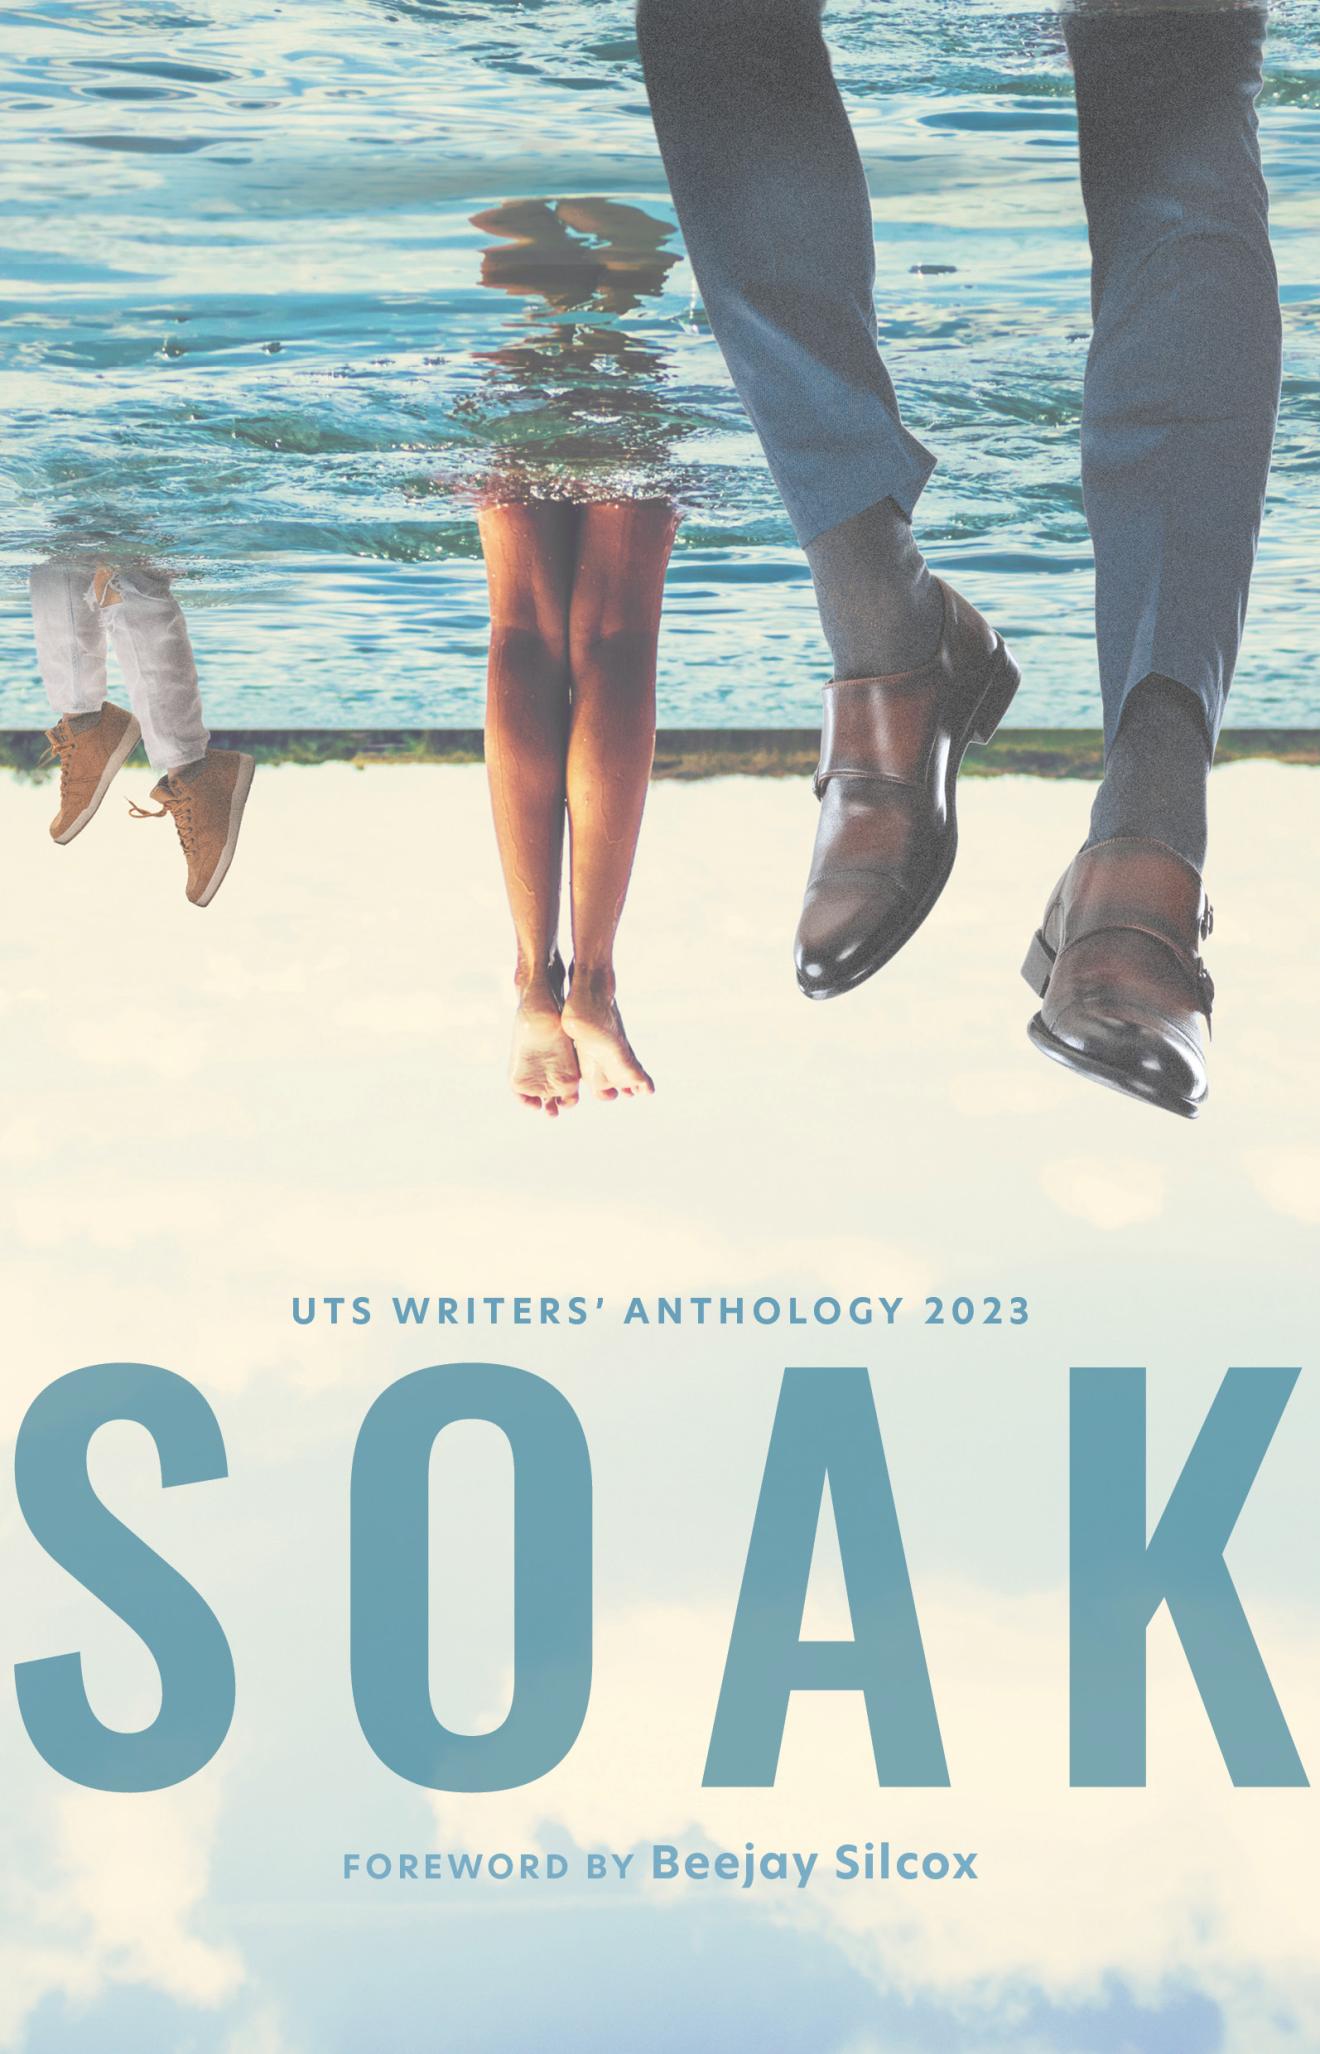 Book cover of Soak, featuring legs hanging out of water